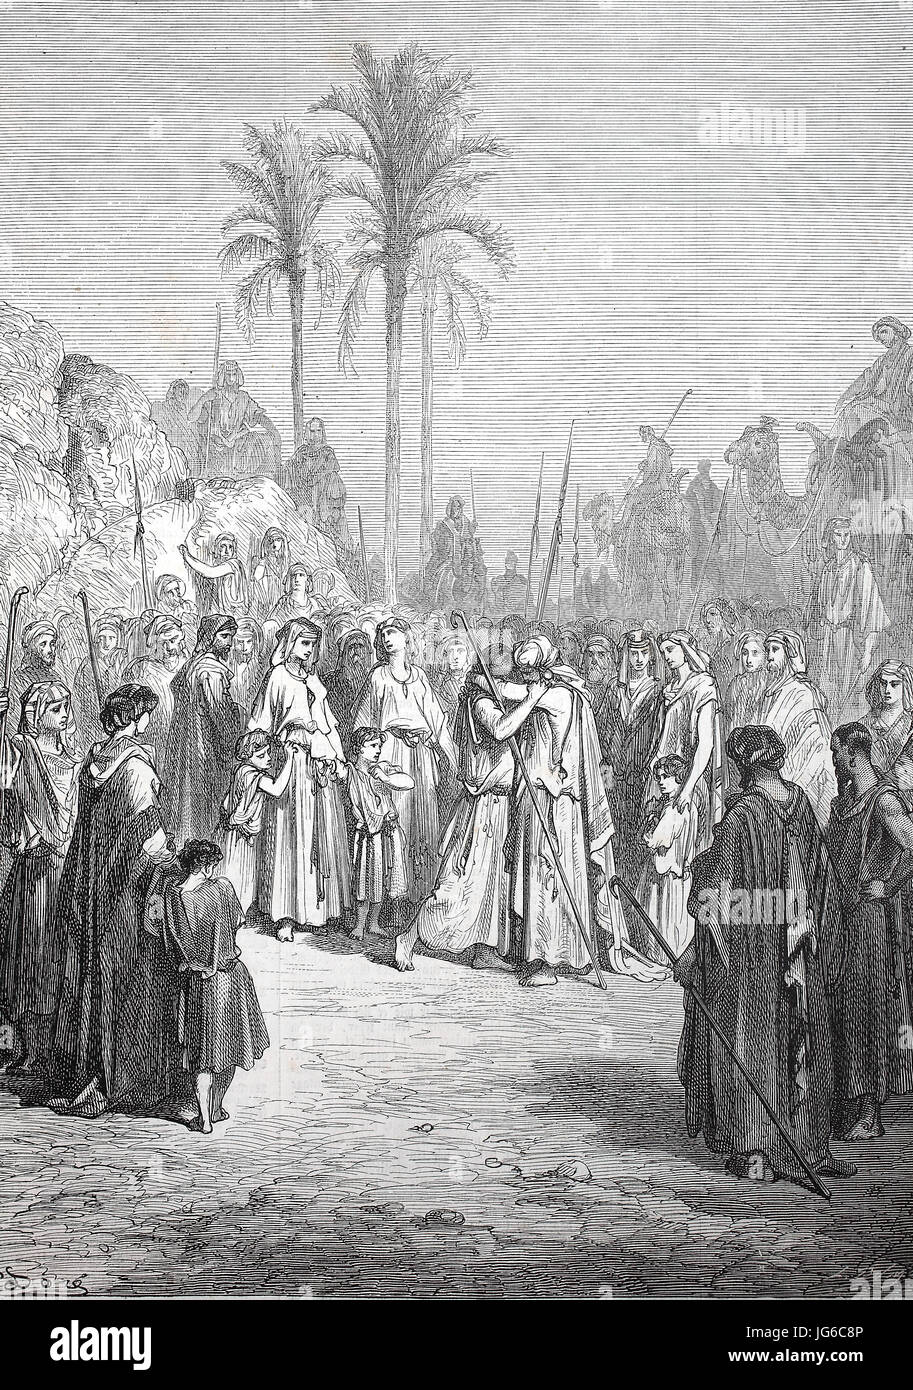 Digital improved:, The Reconciliation of Jacob and Esau, biblical scene, Esau and Jacob reconcile, illustration from the 19th century Stock Photo